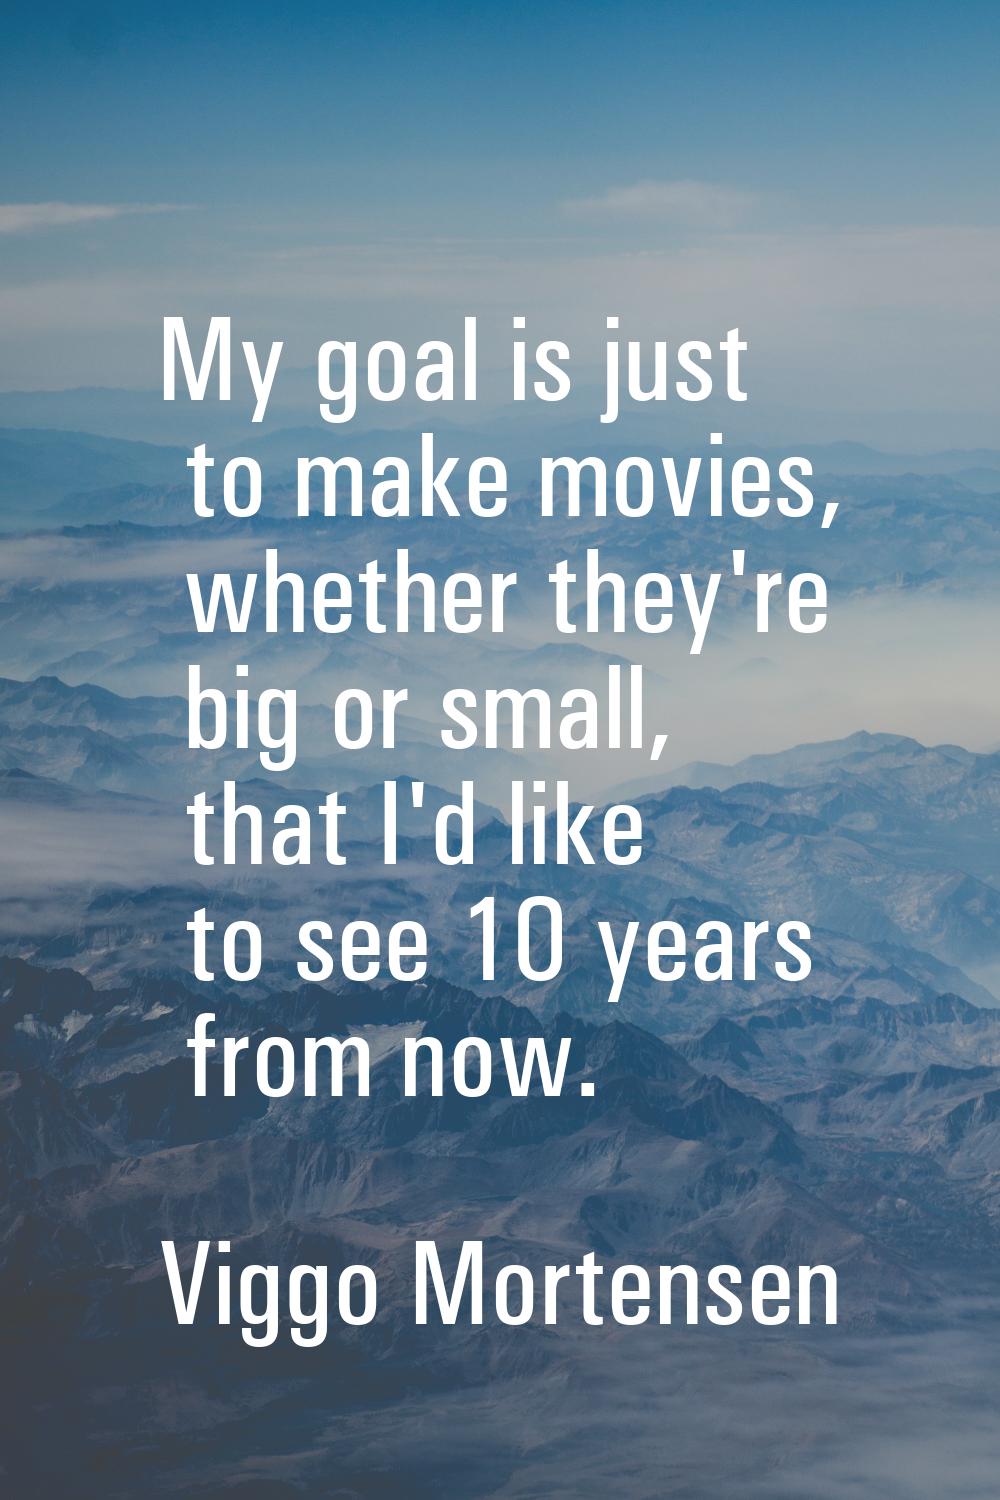 My goal is just to make movies, whether they're big or small, that I'd like to see 10 years from no